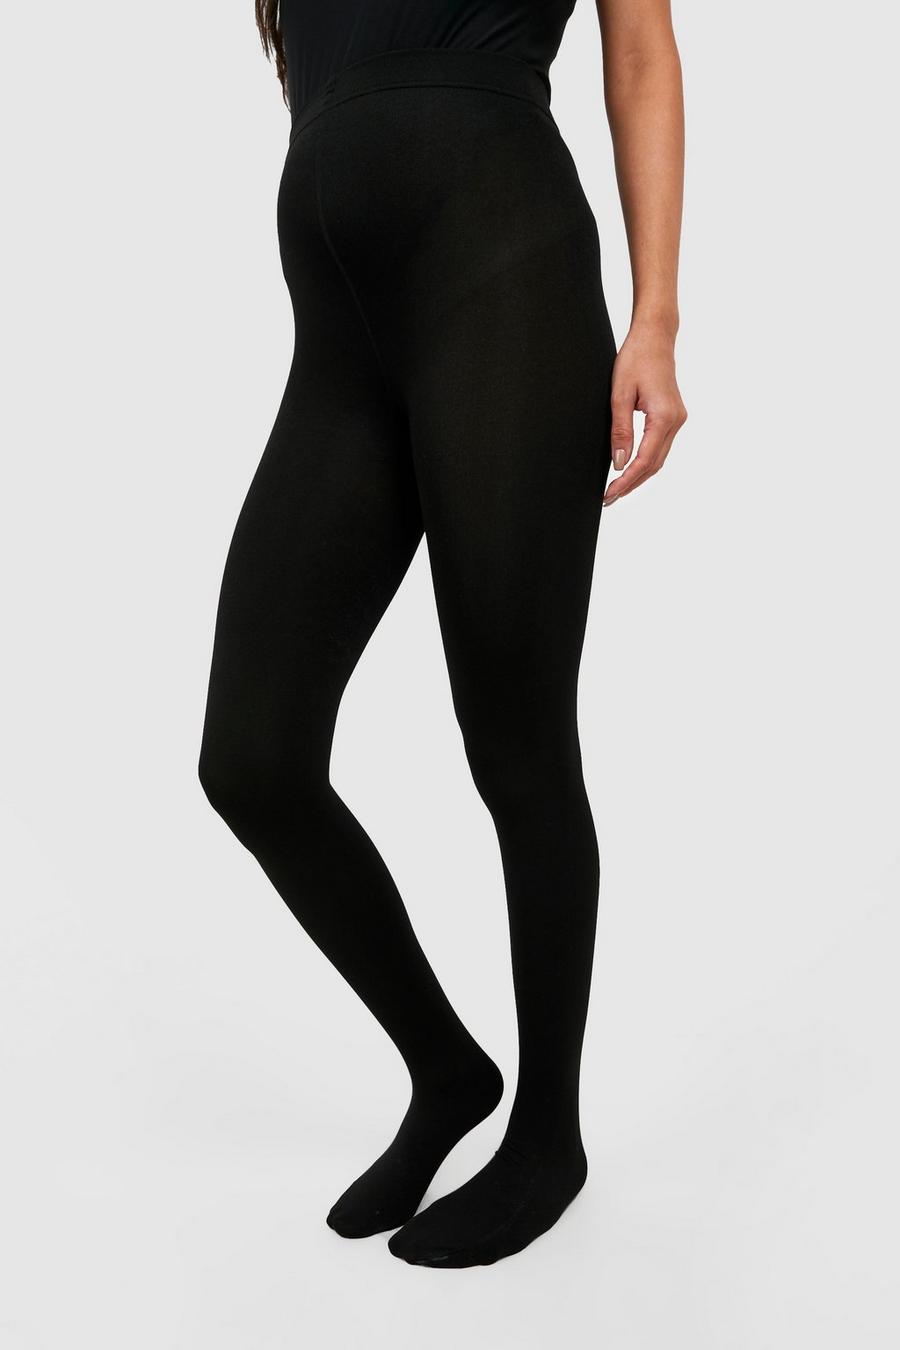 Black Maternity Thermal Fleece Tights image number 1